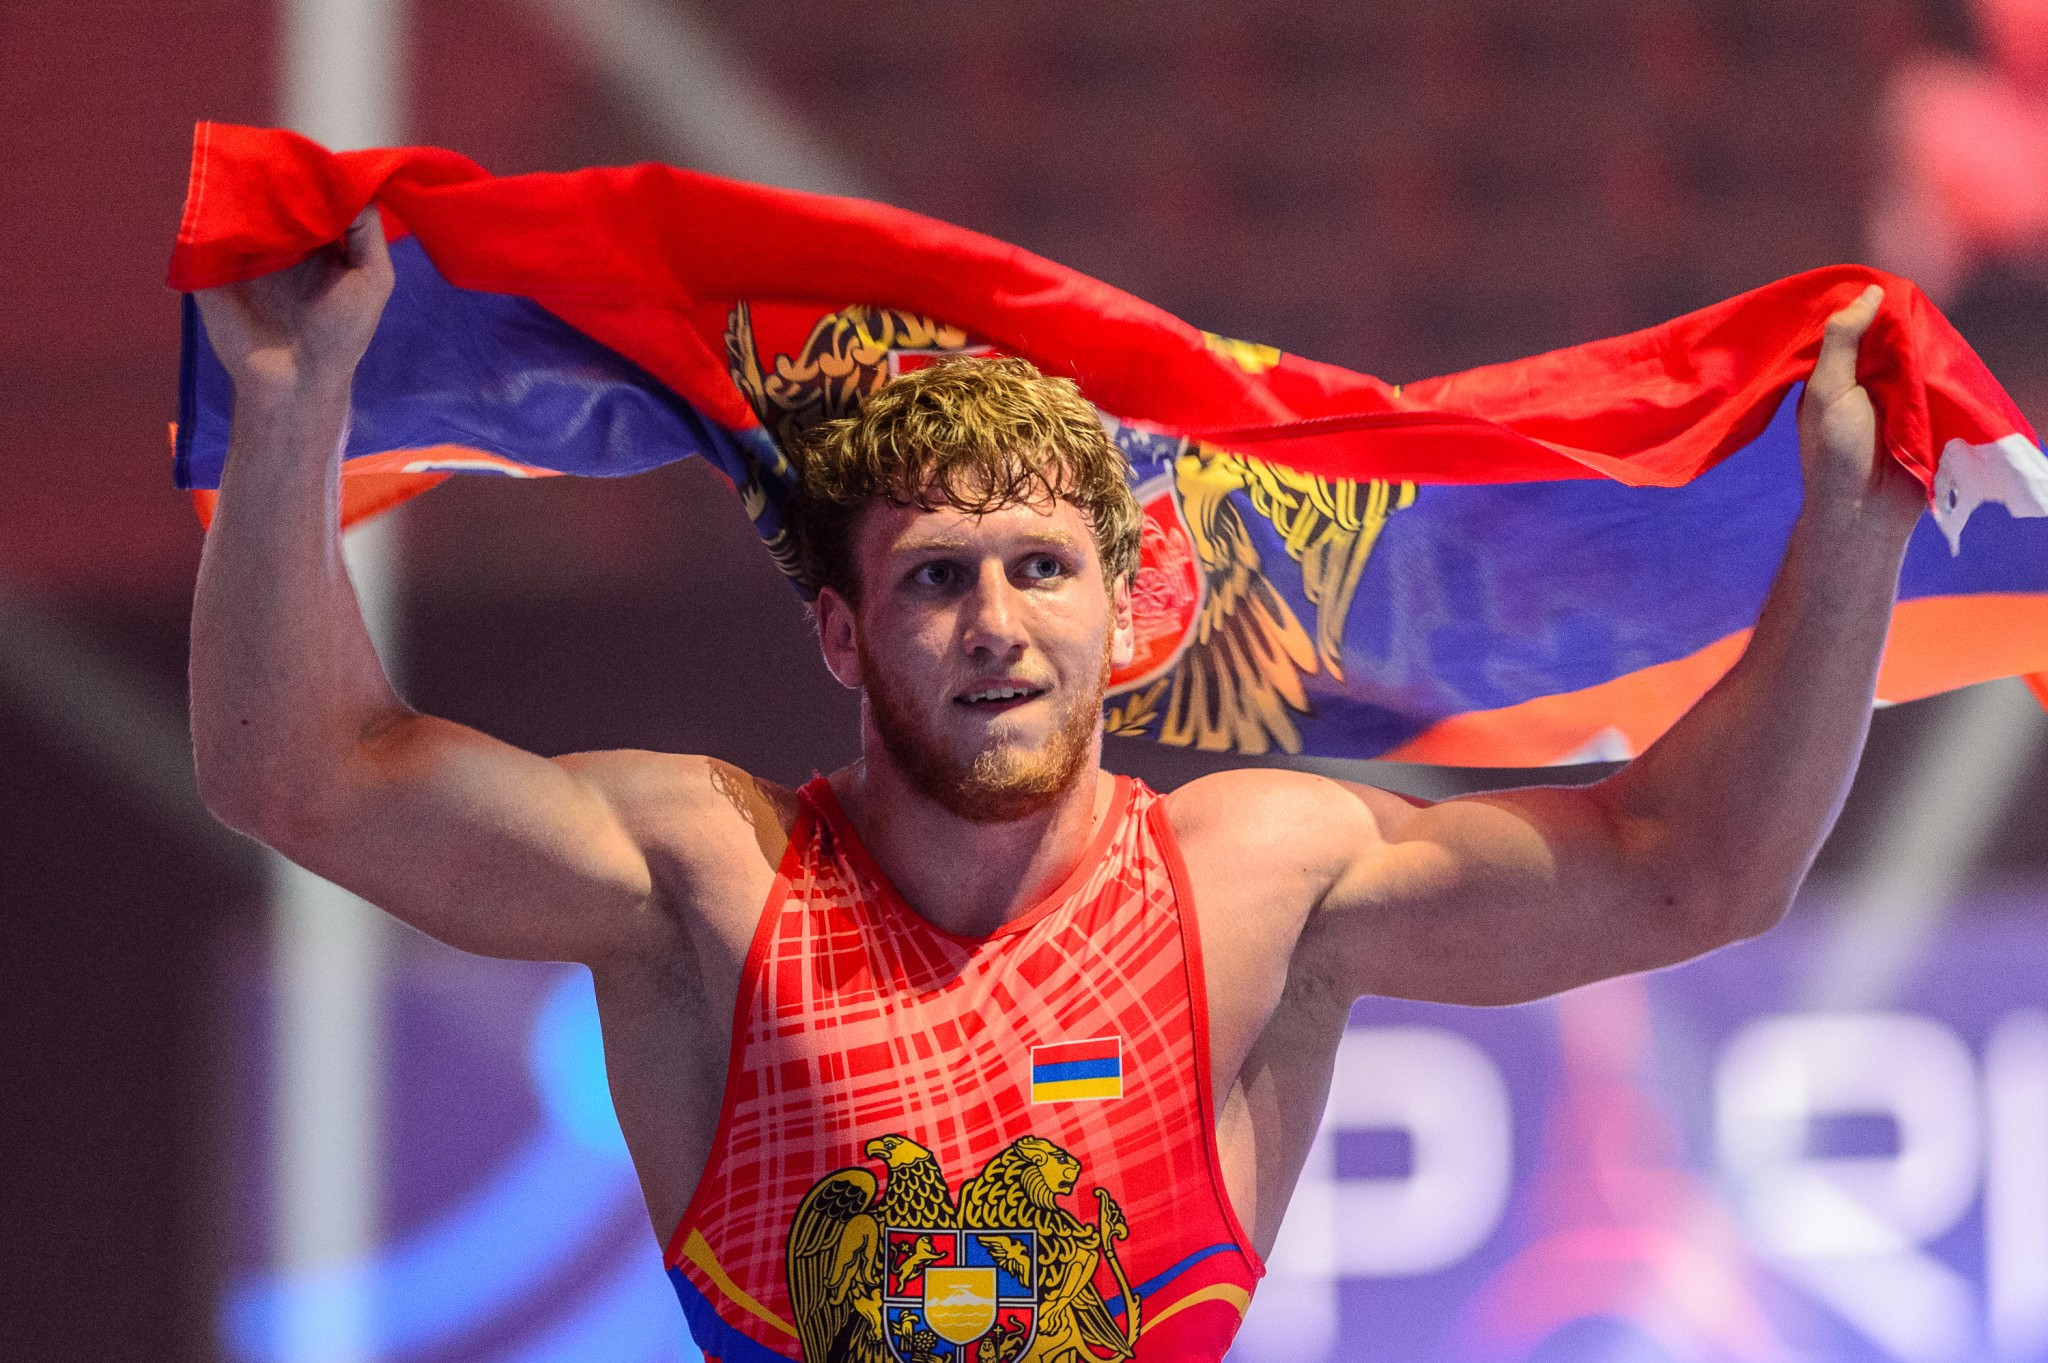 Aleksanyan and Stäbler shine on first day of competition at UWW Wrestling World Championships